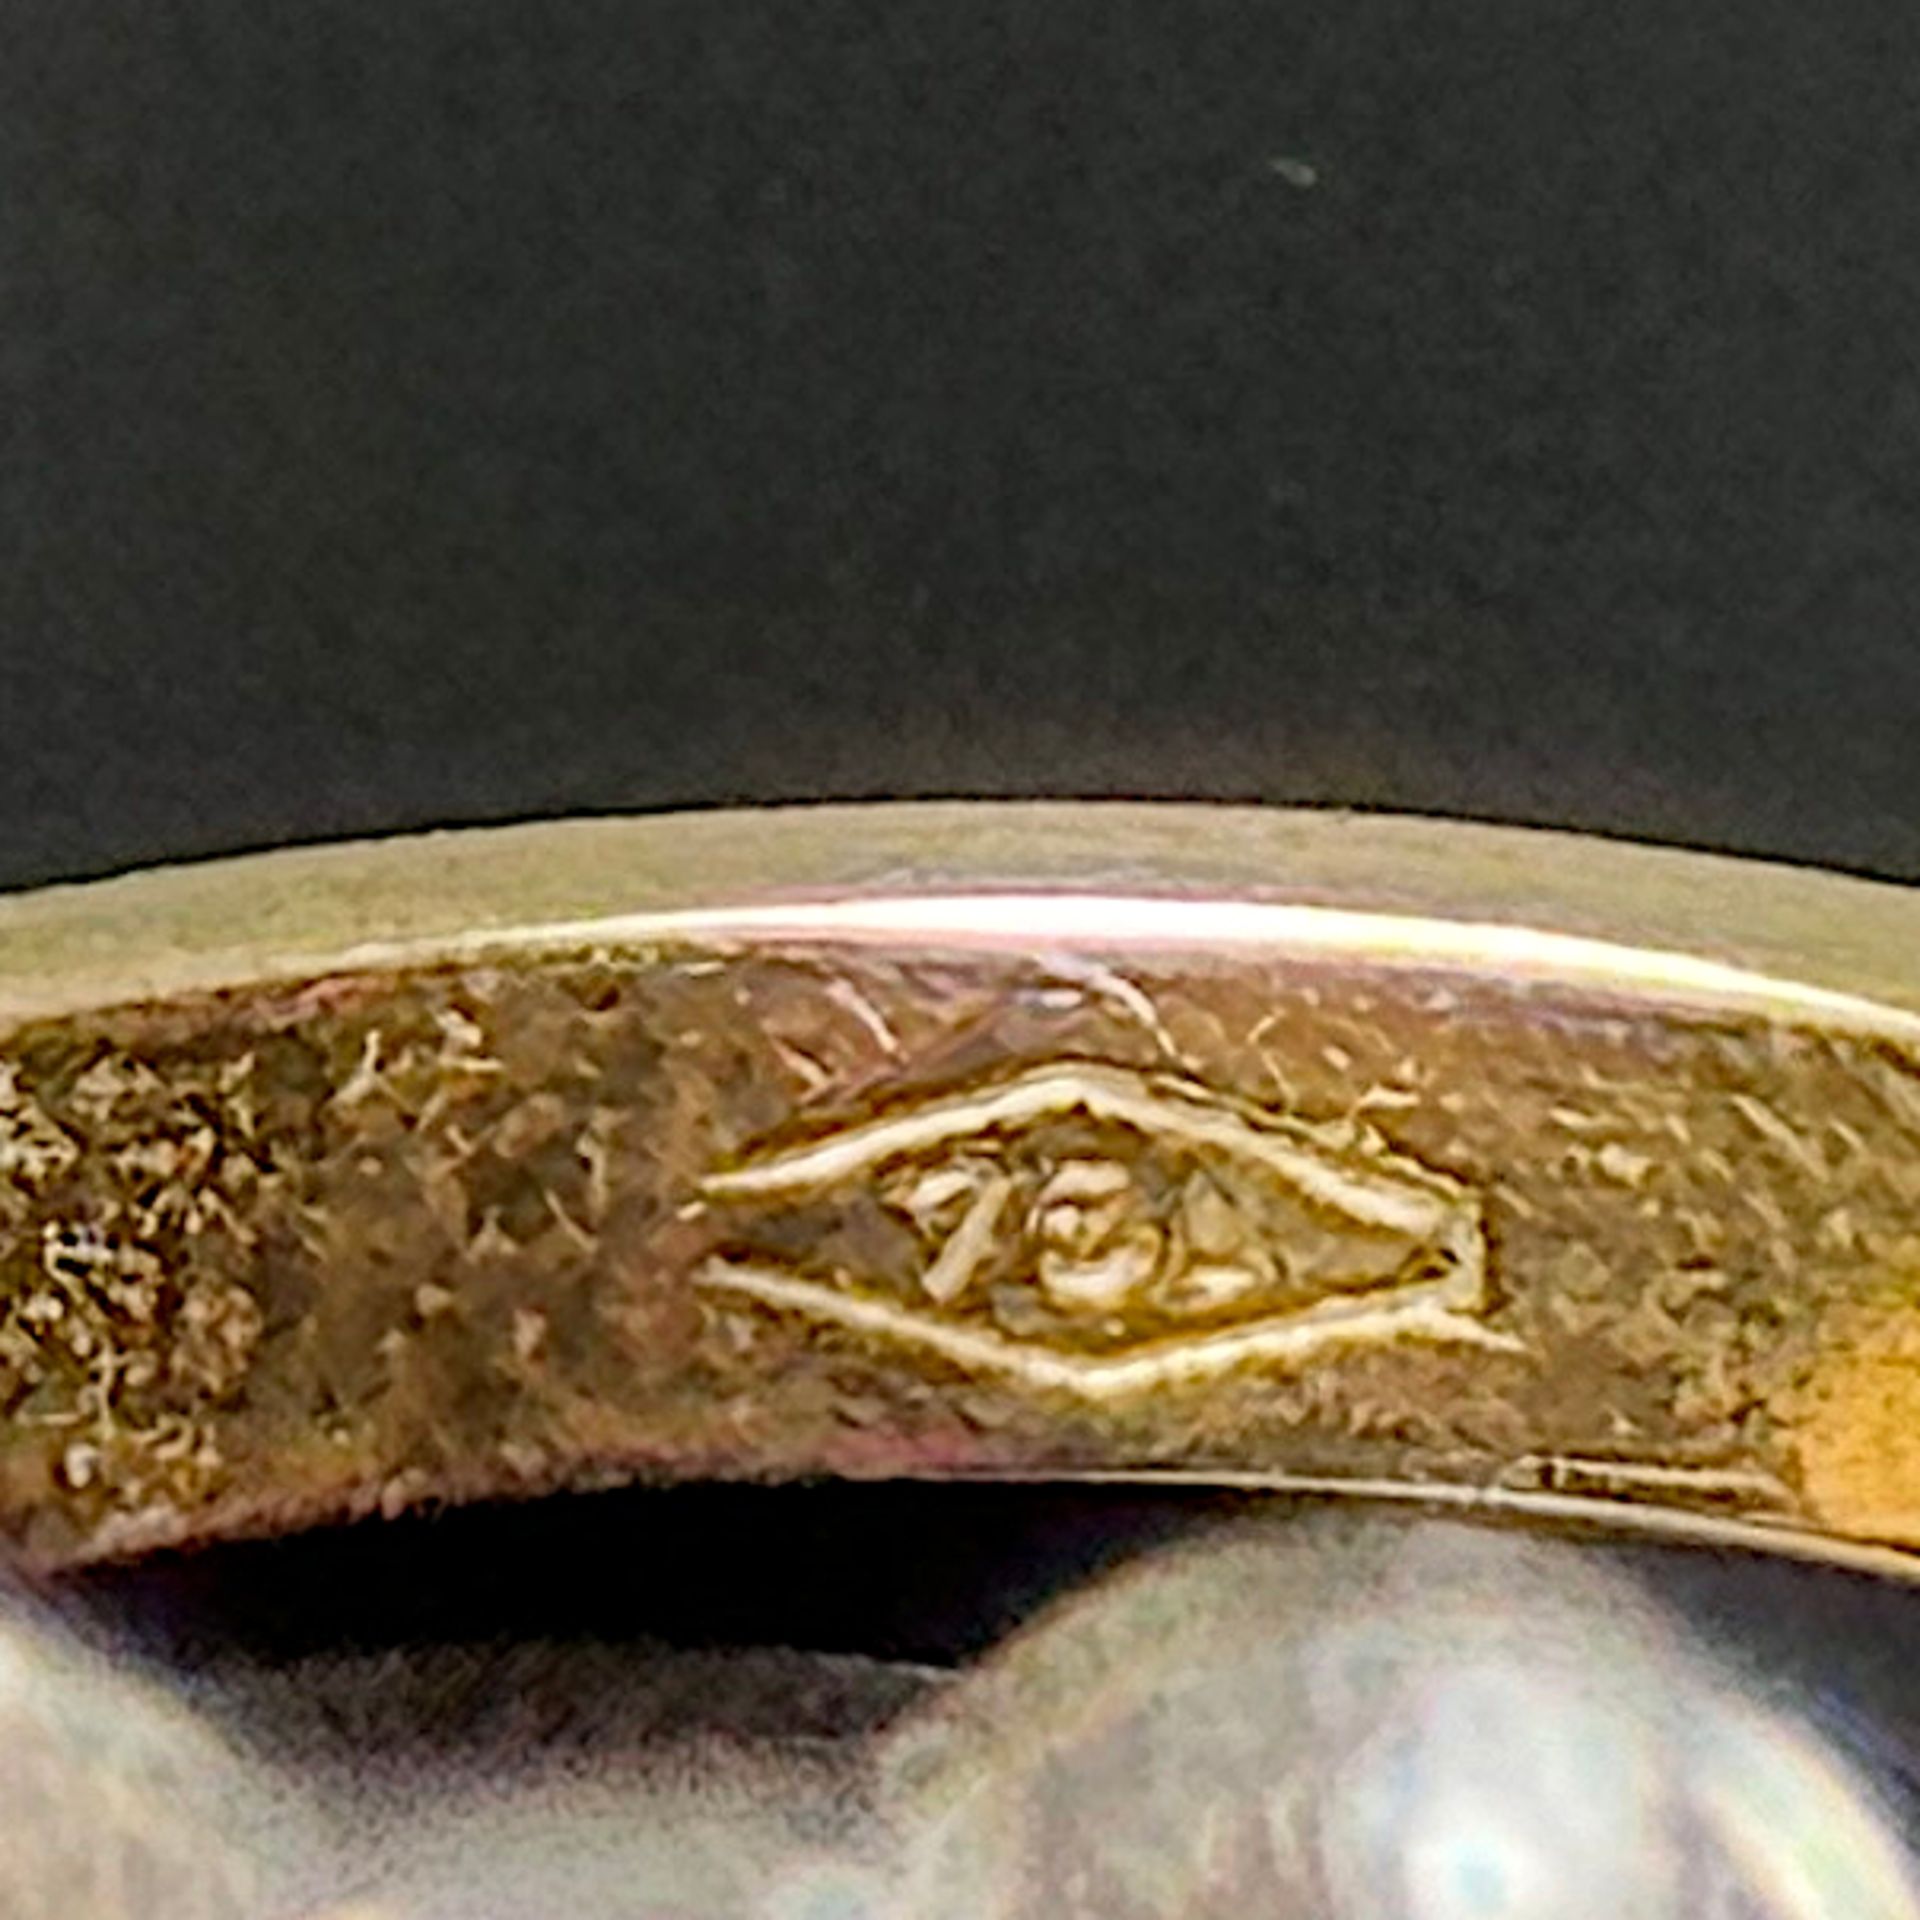 Fancy antique ring, 750/18K yellow gold (hallmarked and tested), setting of diamonds in 800 silver - Image 3 of 4